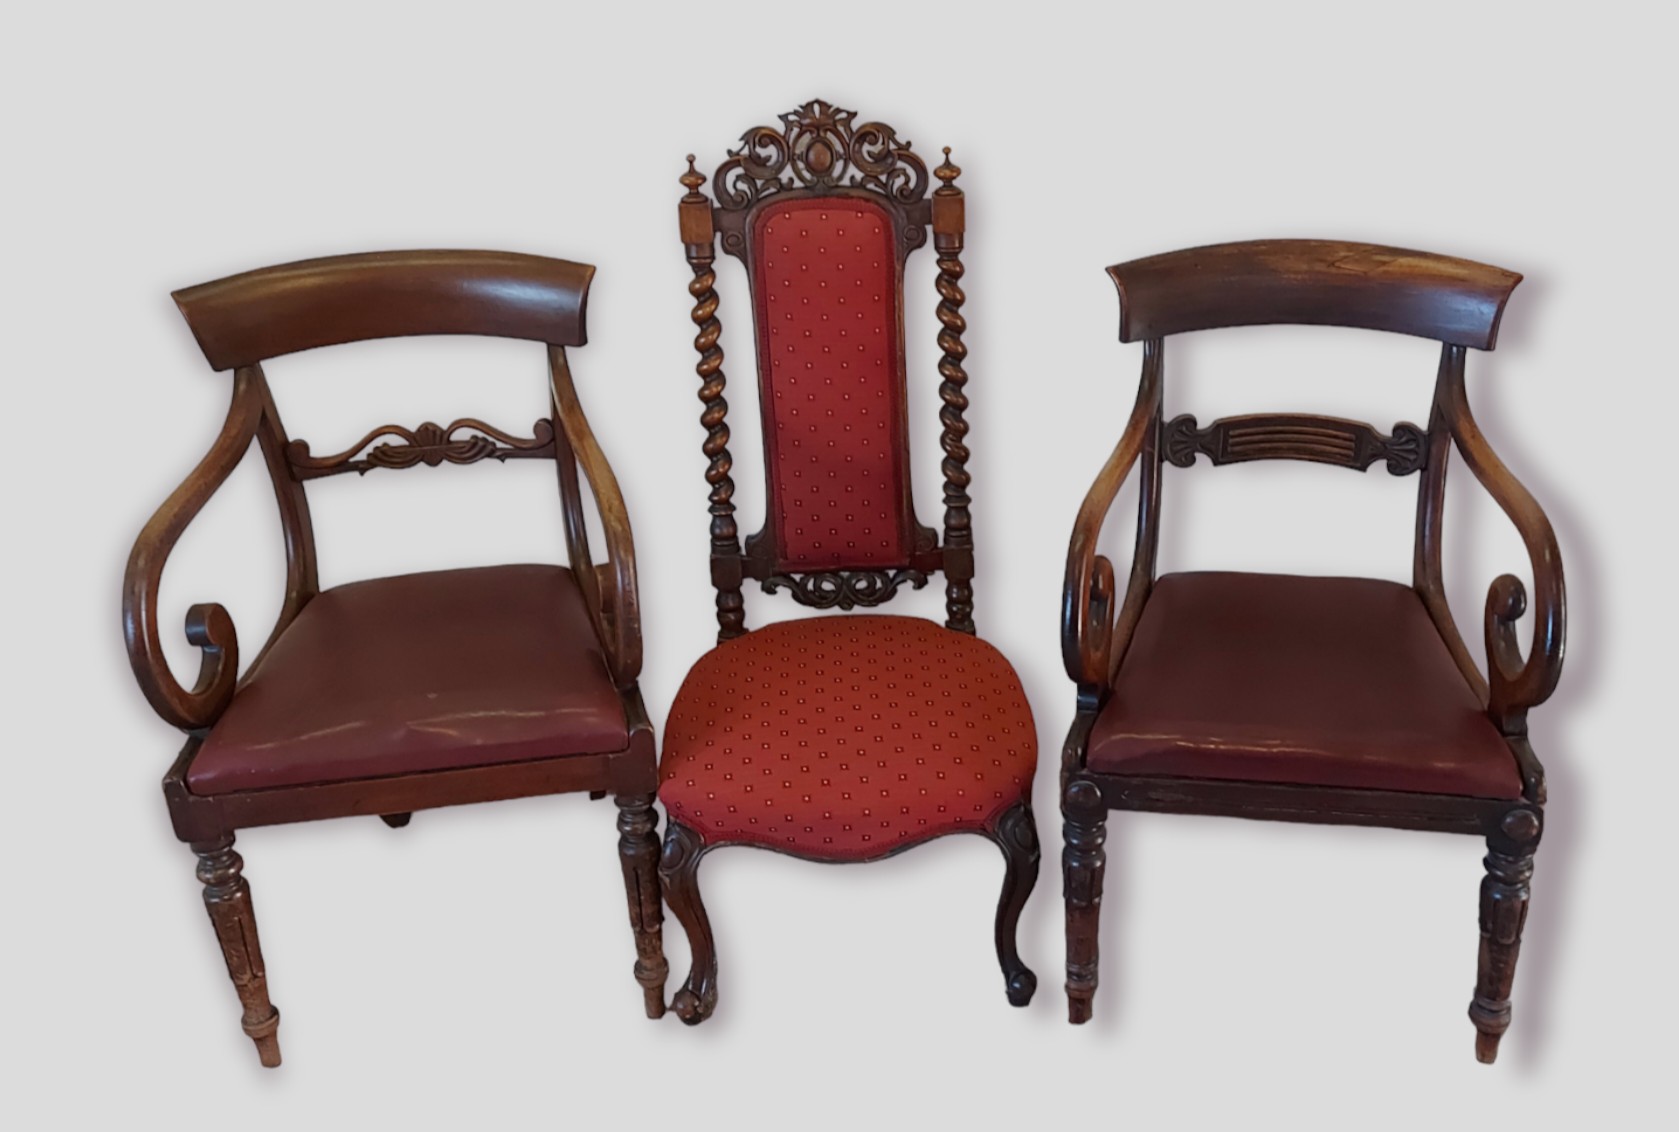 A William IV mahogany open armchair together with another similar open armchair and a Victorian